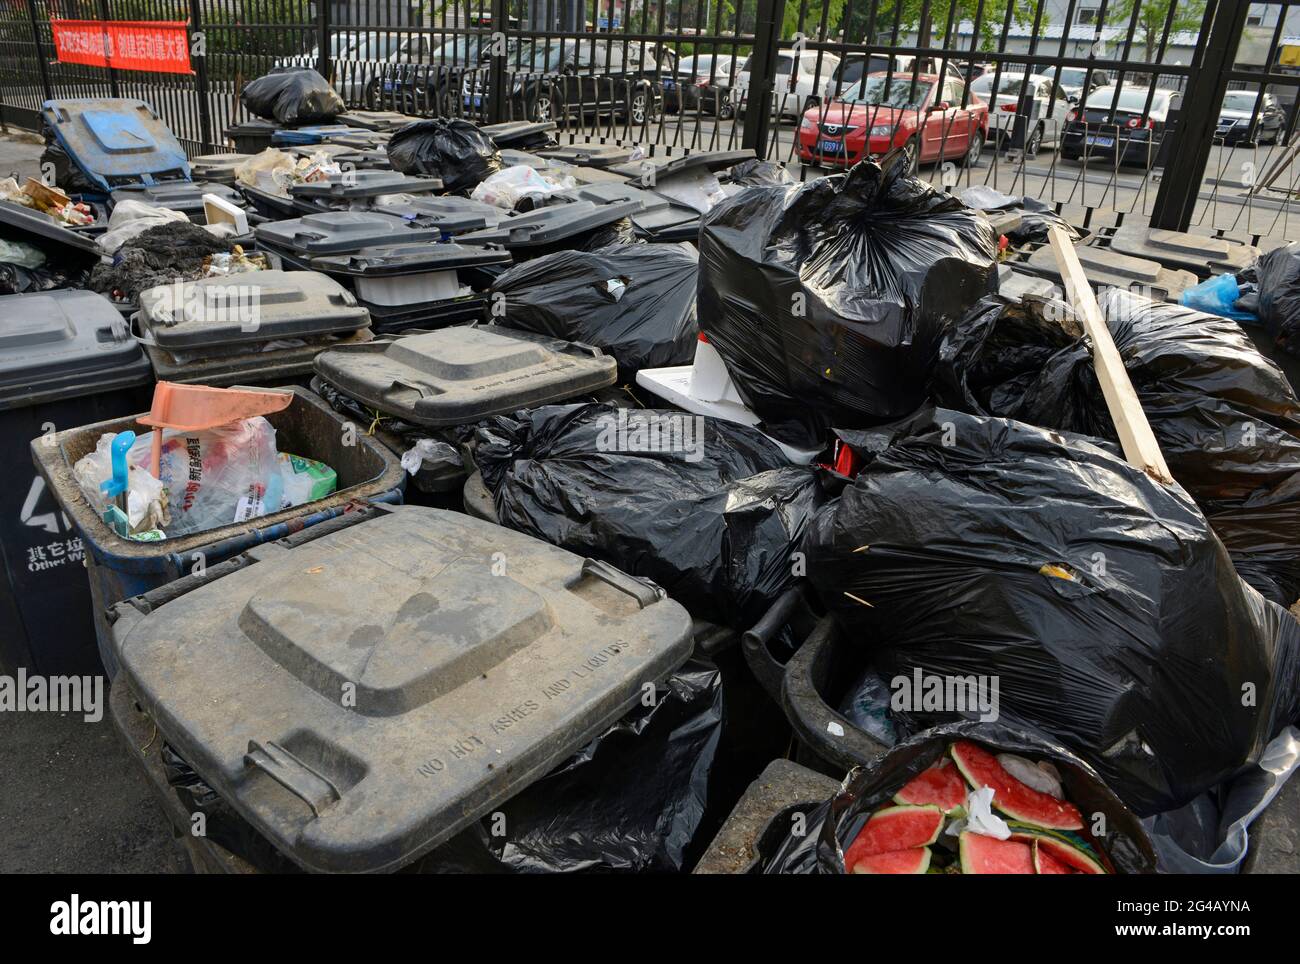 A gathering of full wheely bins in Beijing, China Stock Photo